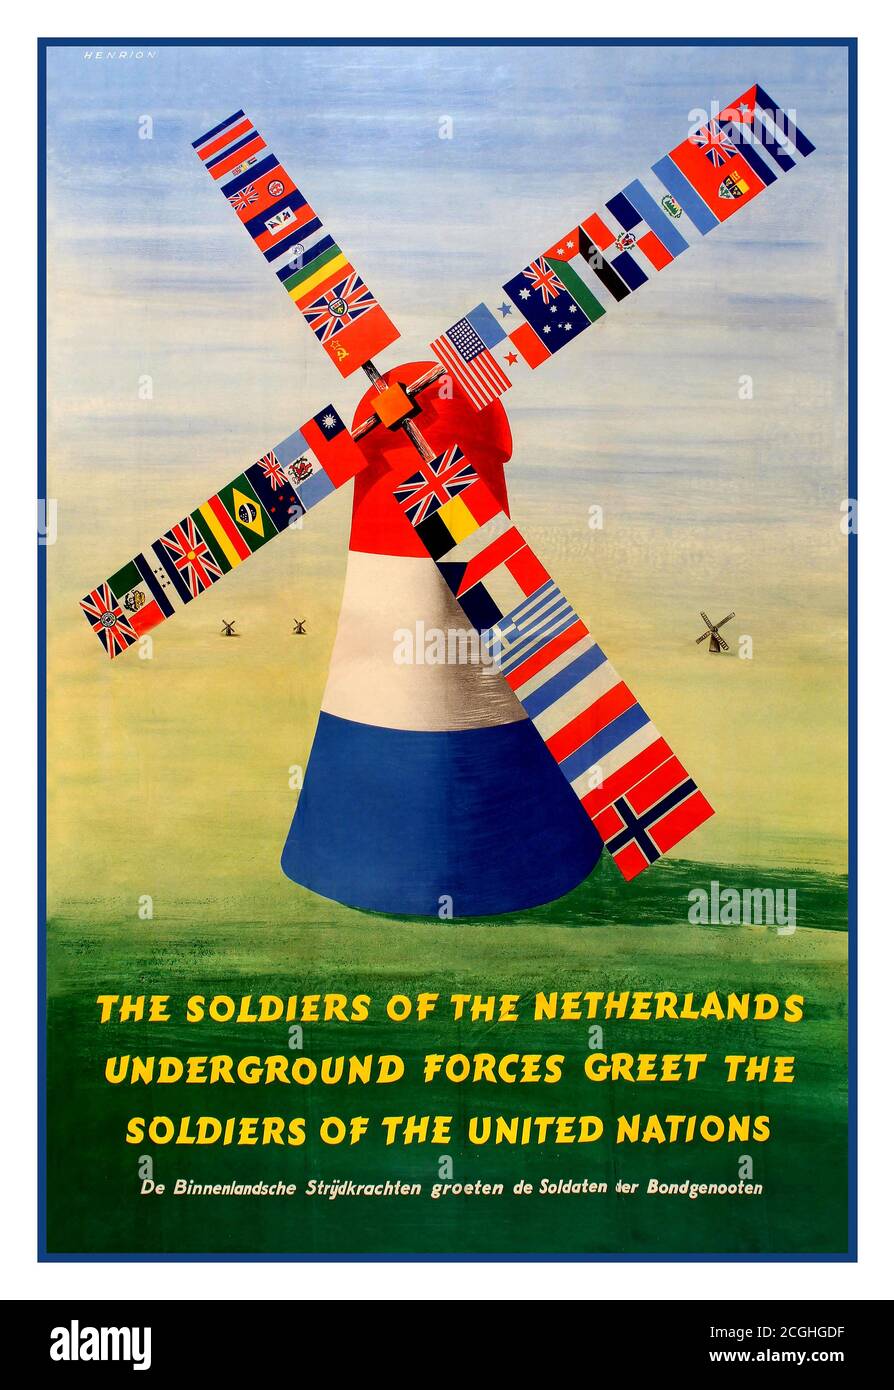 Vintage World War Two propaganda poster issued shortly after the liberation in 1945 with a design by Frederic H.K. Henrion (1914-1990): The soldiers of the Netherlands Underground Forces greet the soldiers of the United Nations. (Dutch title: De Binnenlandsche Strijdkrachten groeten de Soldaten der Bondgenooten). Printed by Offset Smeets, Weert. The Dutch resistance to the Nazi occupation of the Netherlands during World War II can be mainly characterized as non-violent, and was organized by the Communist Party, churches, and independent groups. Stock Photo